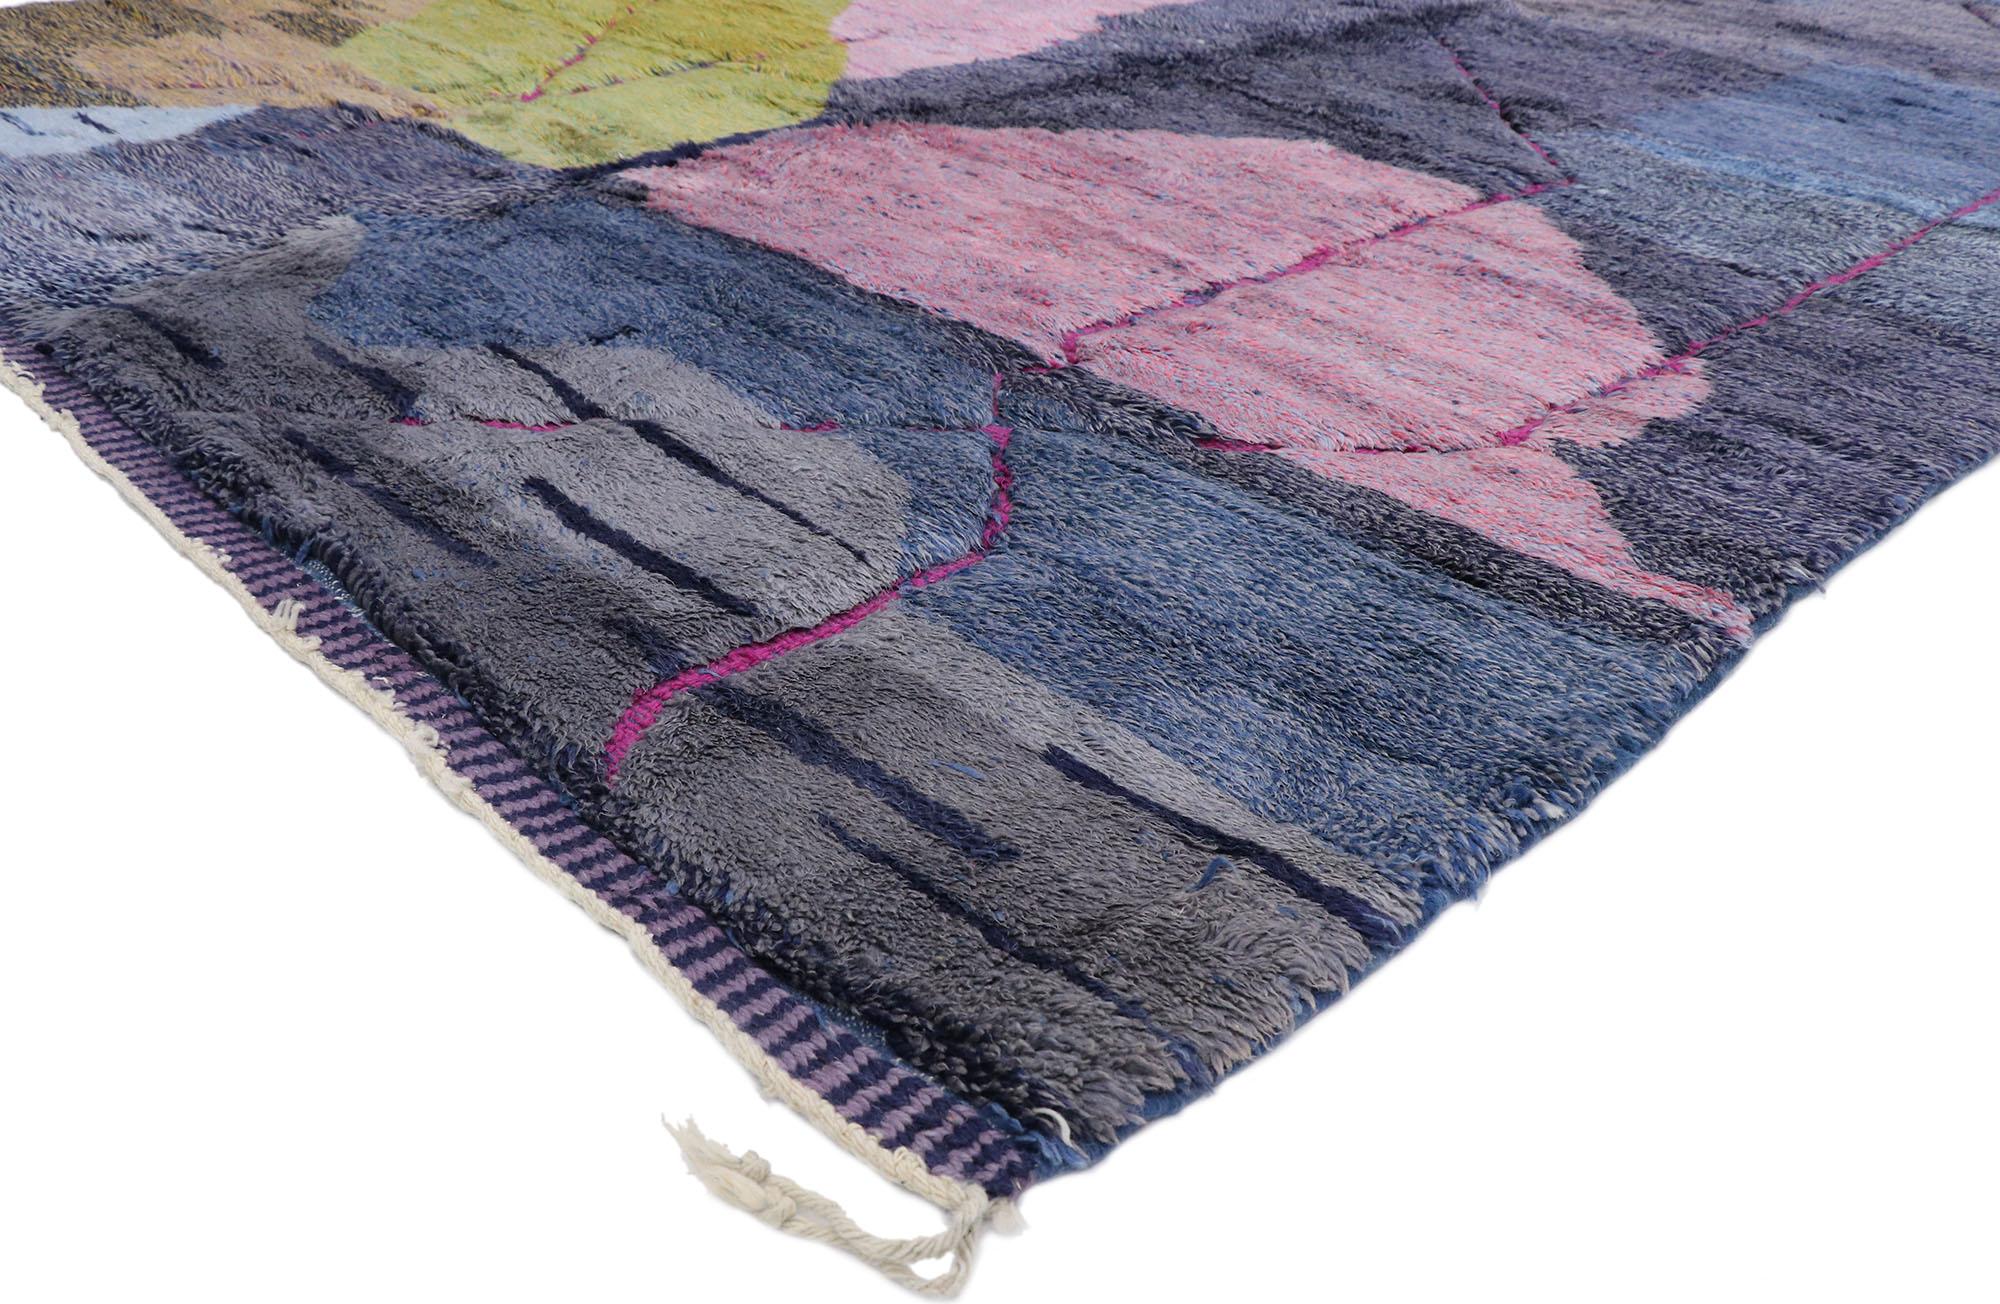 21101 Colorful Abstract Moroccan Rug, 08'08 x 11'01.
Abstract Expressionism marries nomadic charm in this hand knotted wool Berber Moroccan rug. The visual complexity and vibrant colors woven into this piece work together creating a bold, expressive